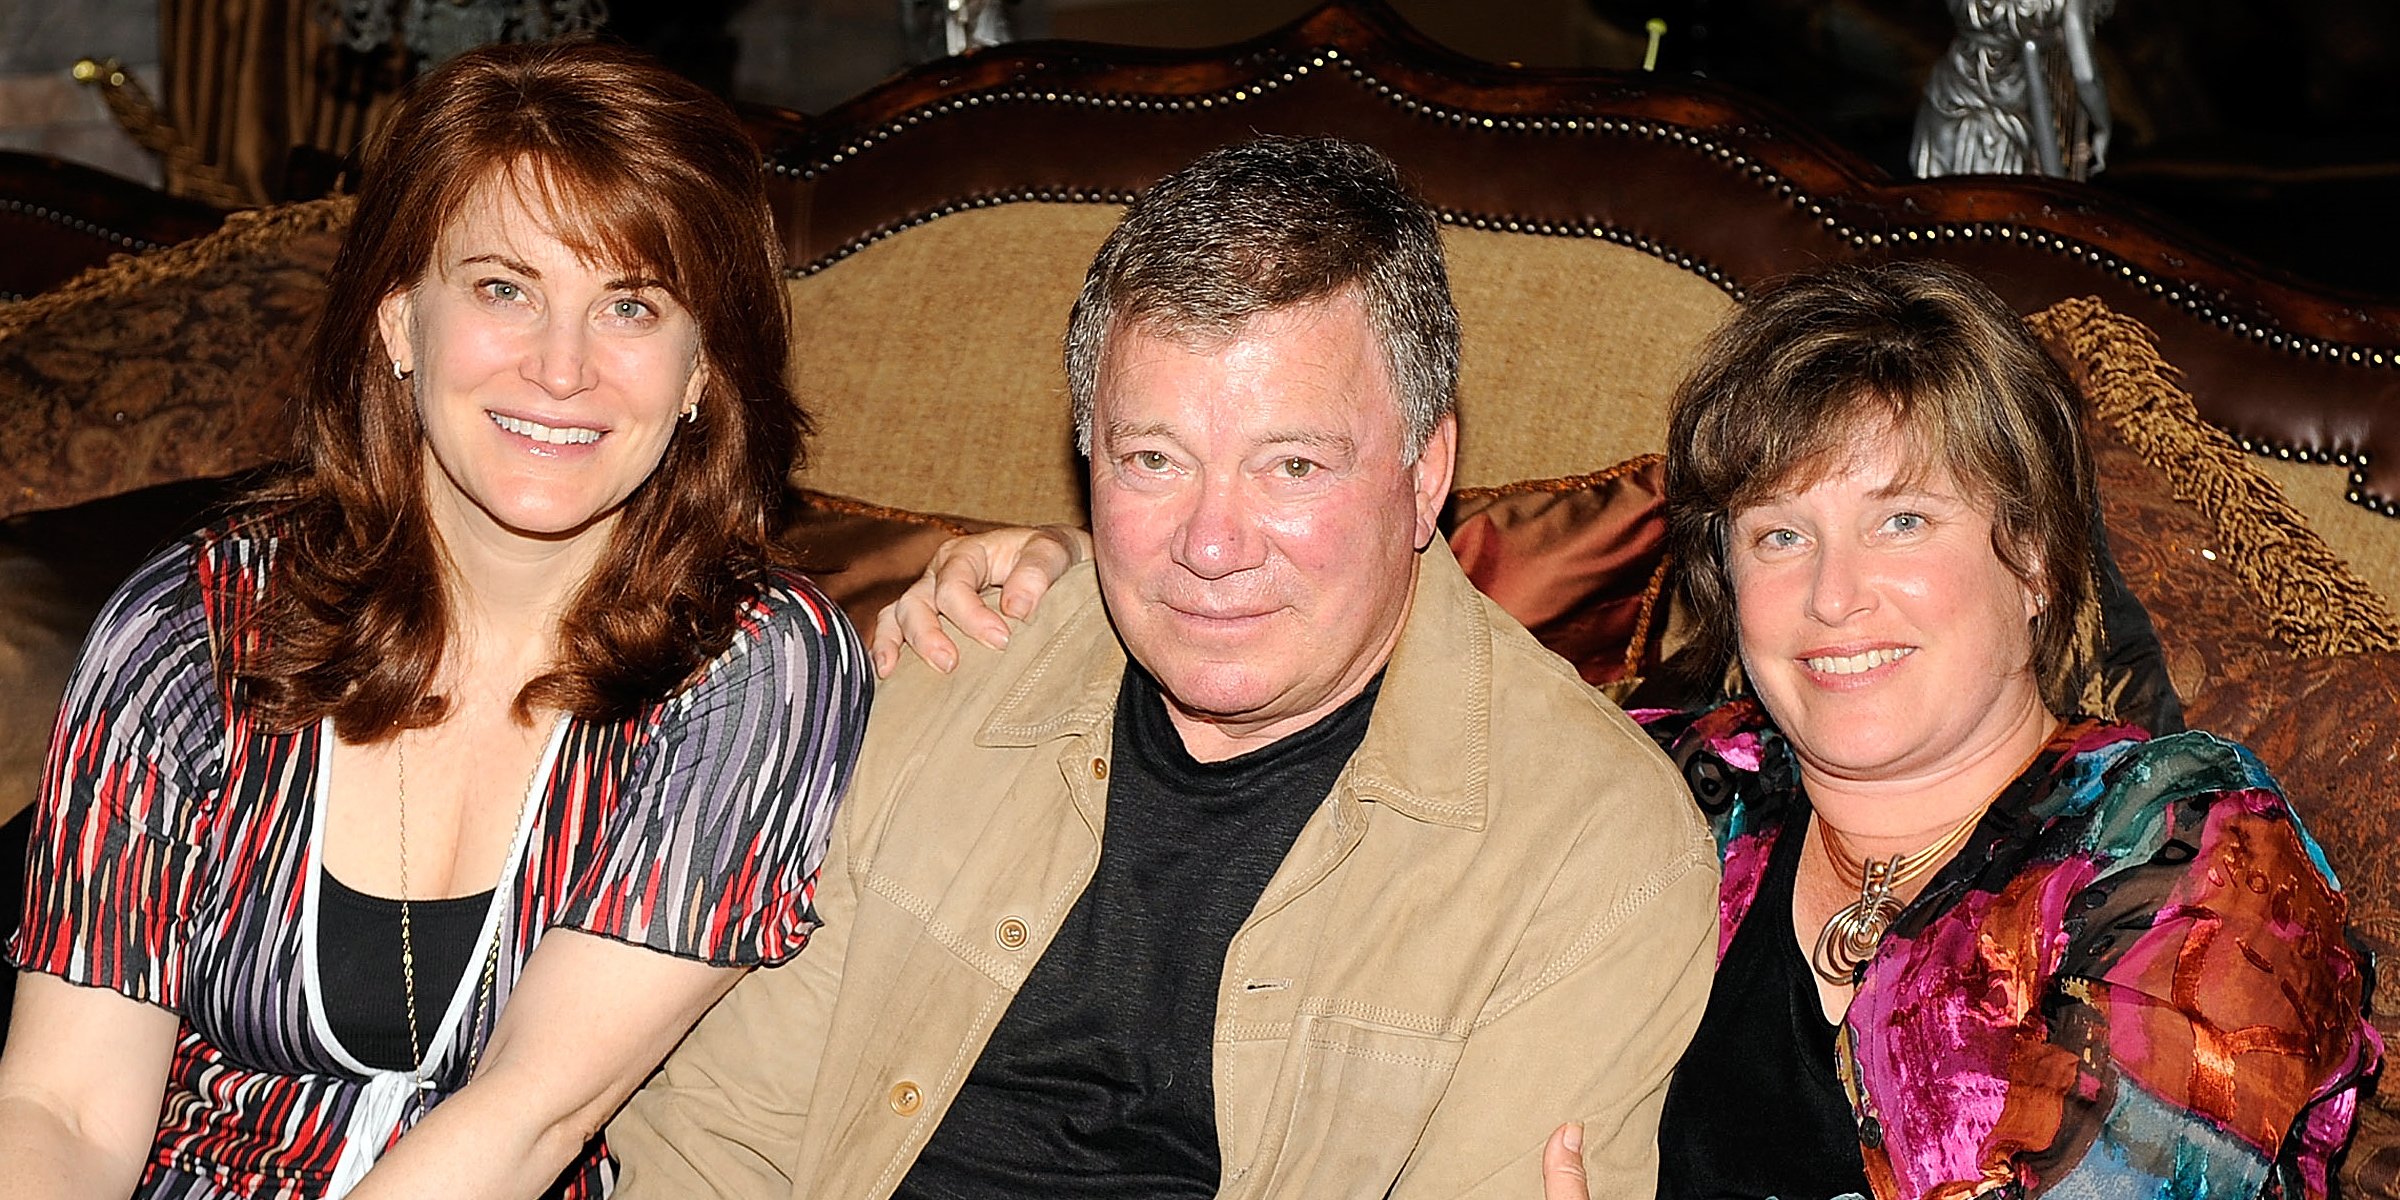 William Shatner and his daughters | Source: Getty Images